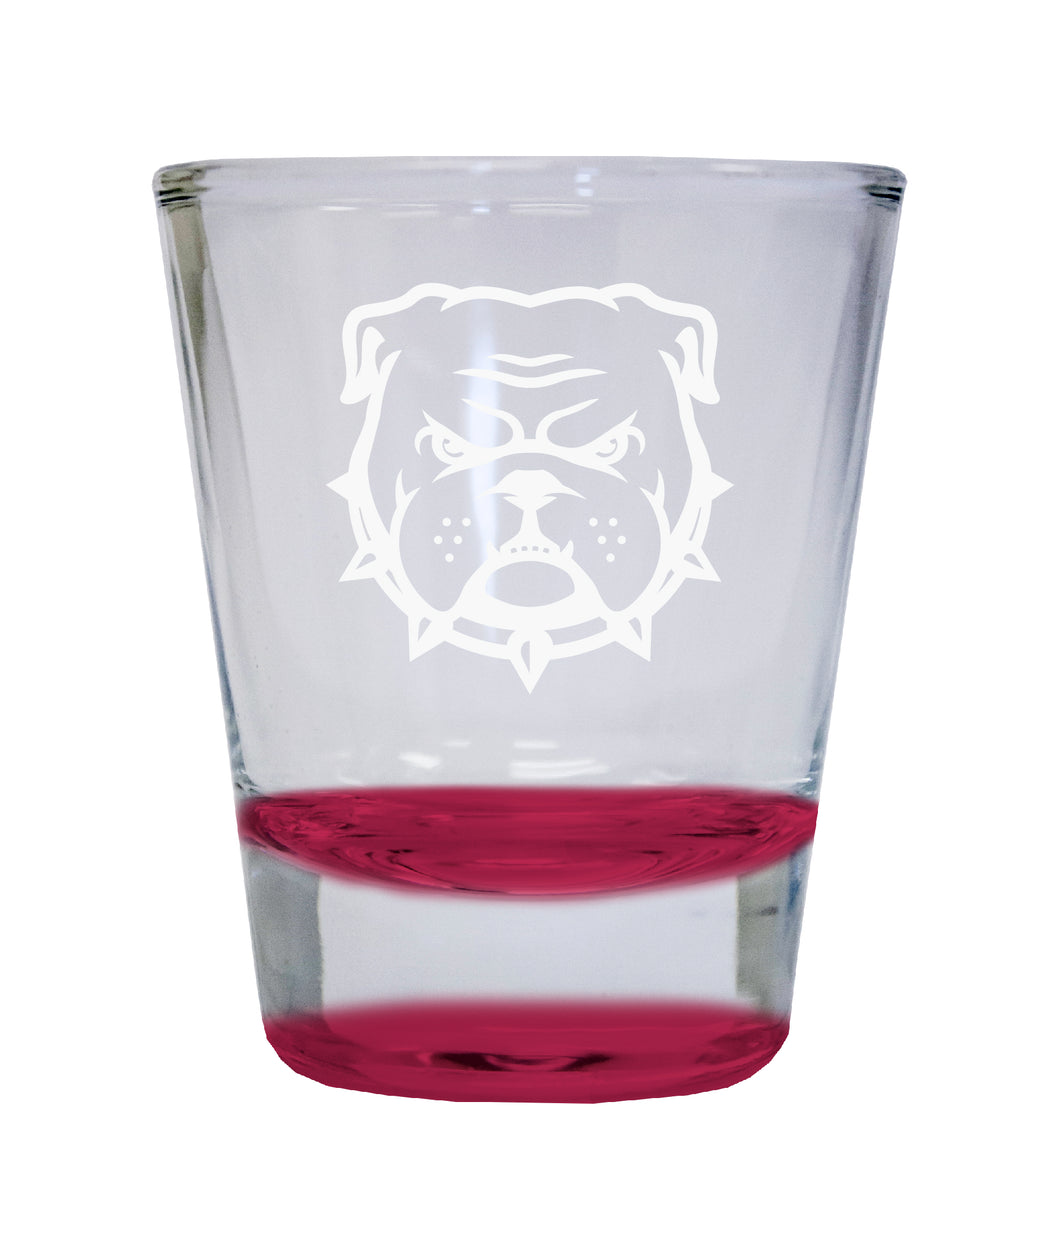 Truman State University Etched Round Shot Glass 2 oz Red